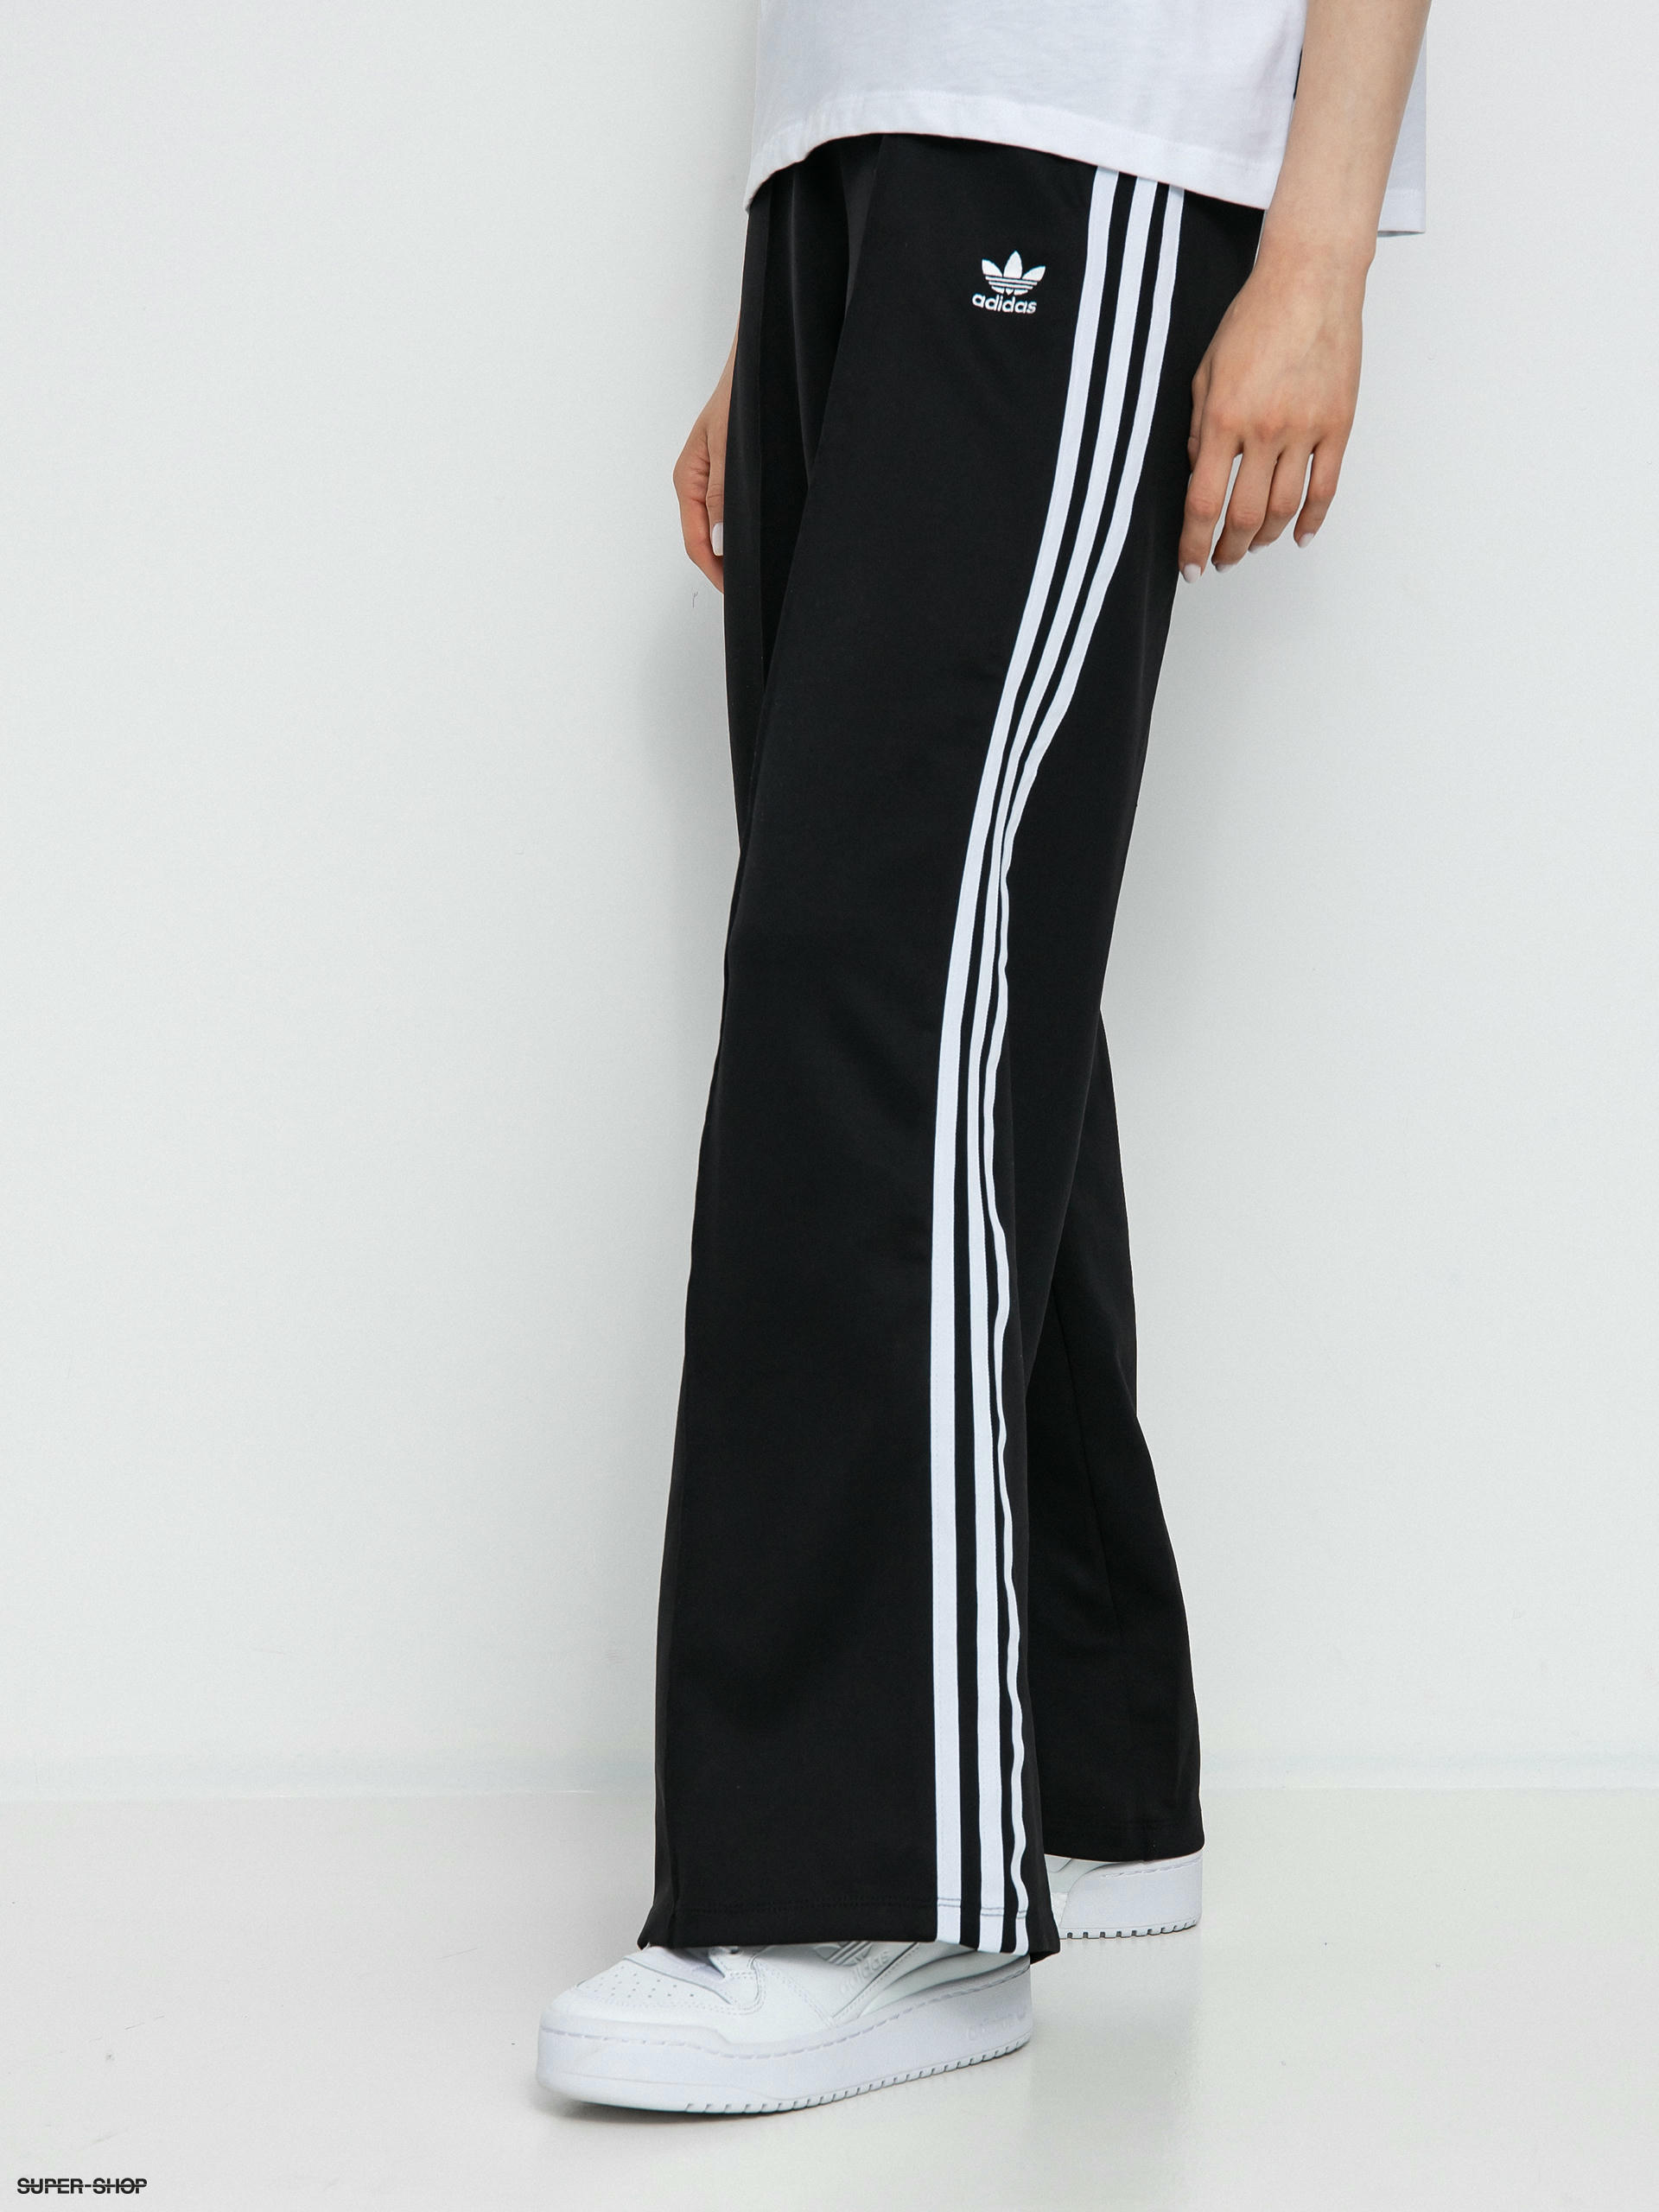 Adidas Climafit vintage y2k low waisted track pants | Shapiro Selective